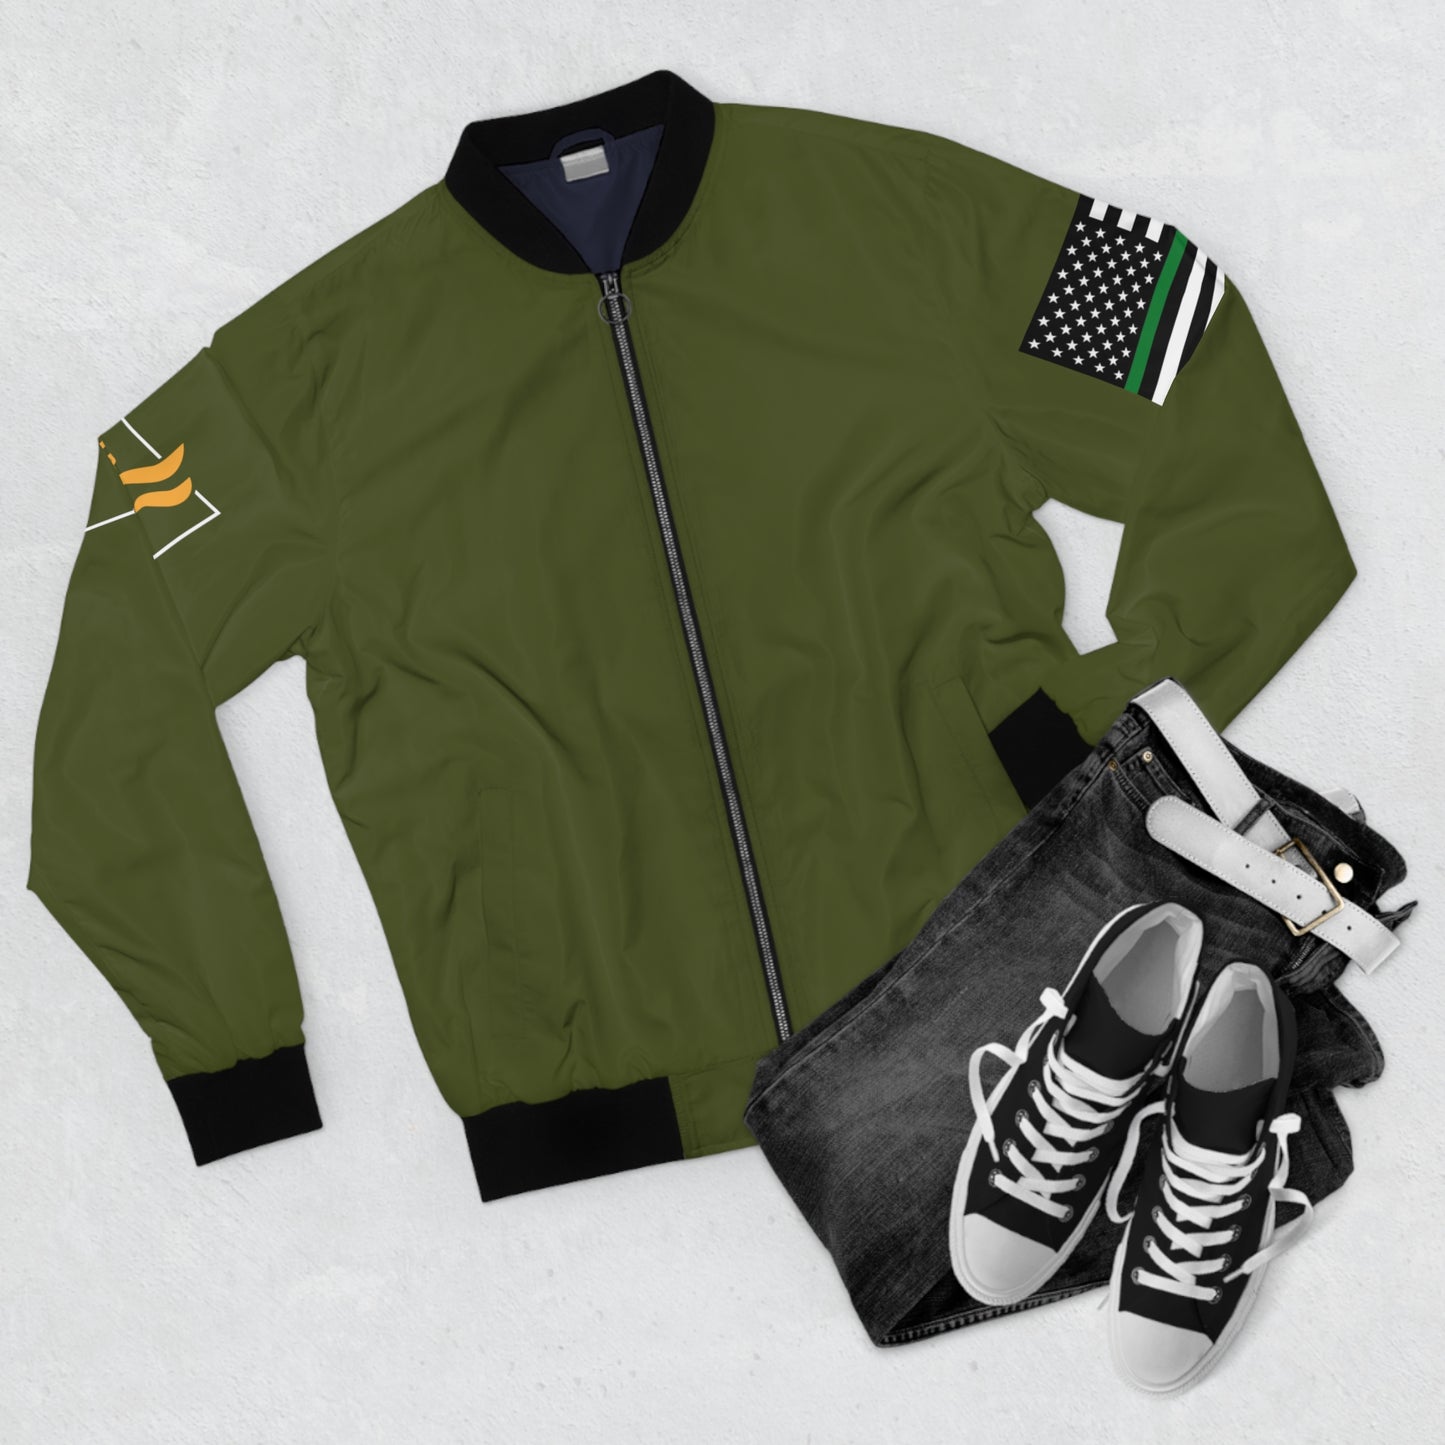 The Scented Soldier Men's Bomber Jacket